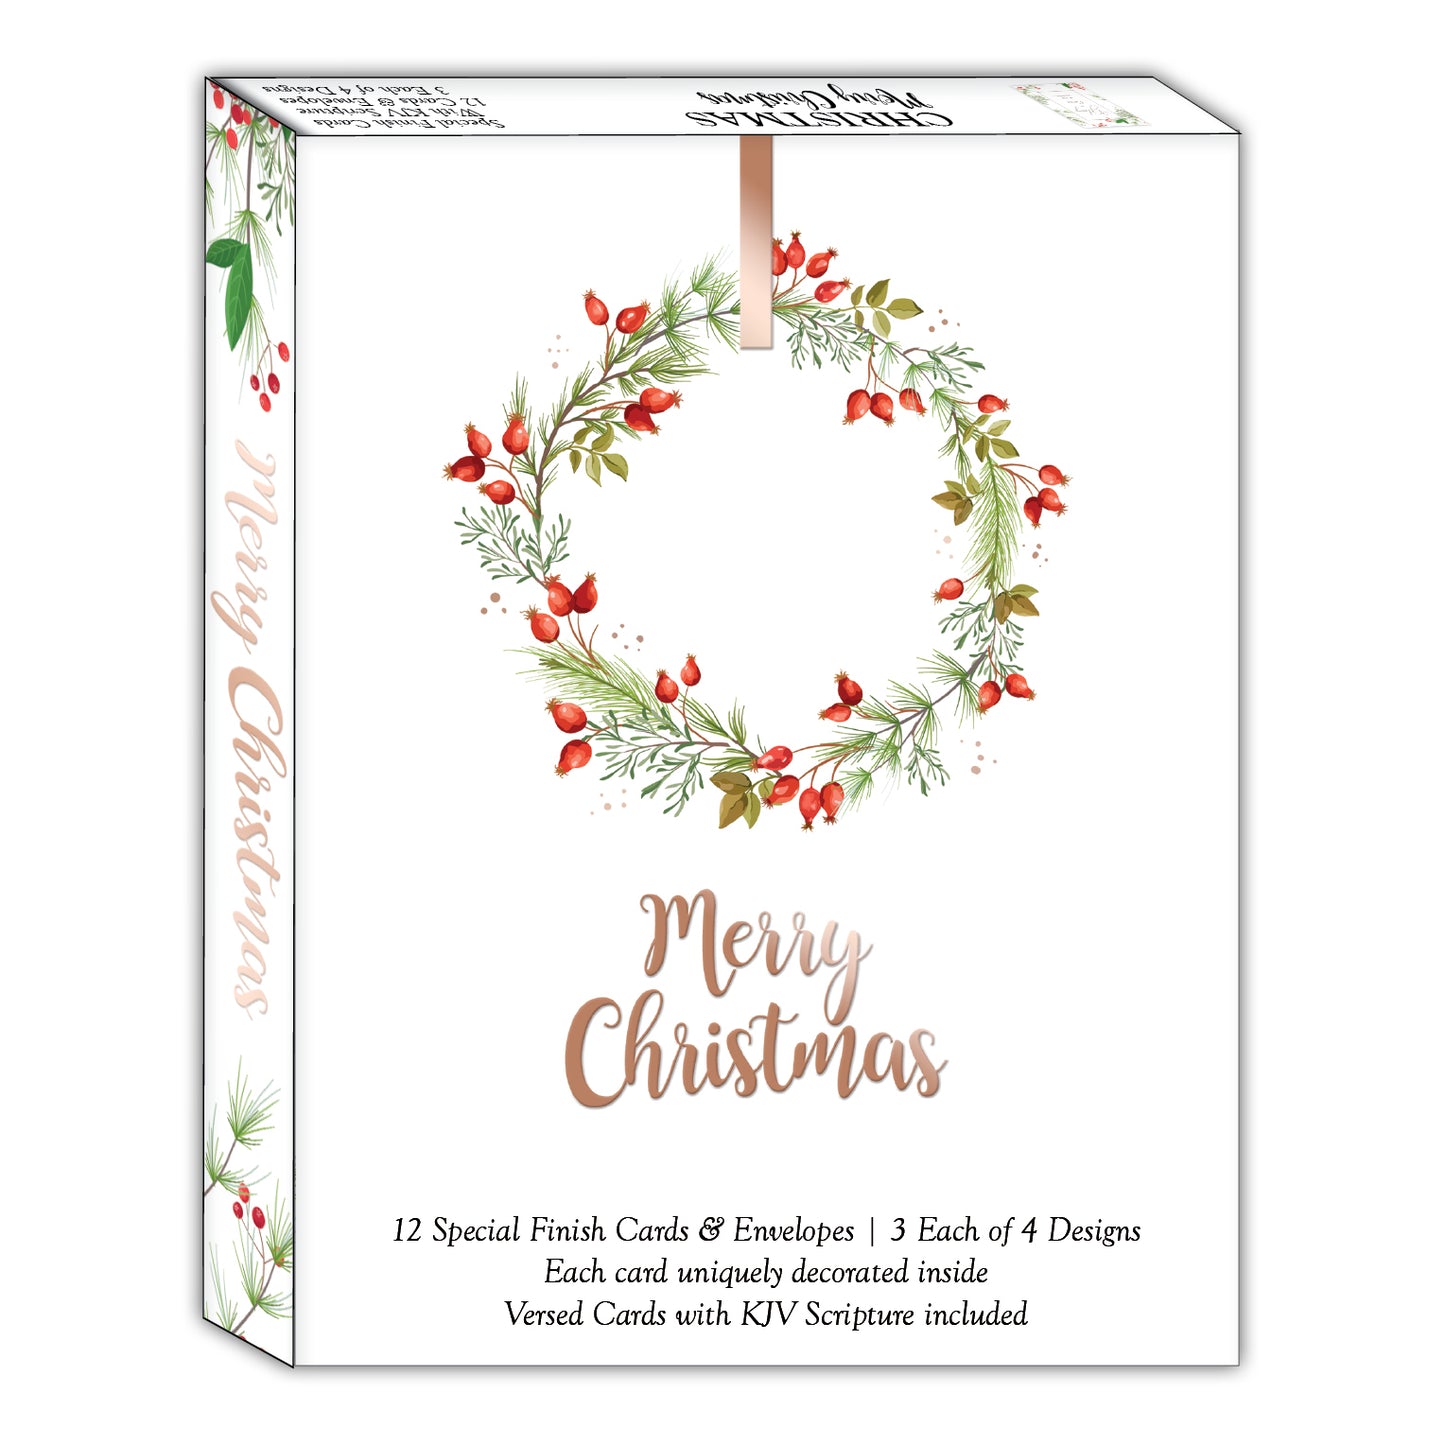 Assorted Boxed Christmas Cards - Merry Christmas - 12 Cards and Envelopes